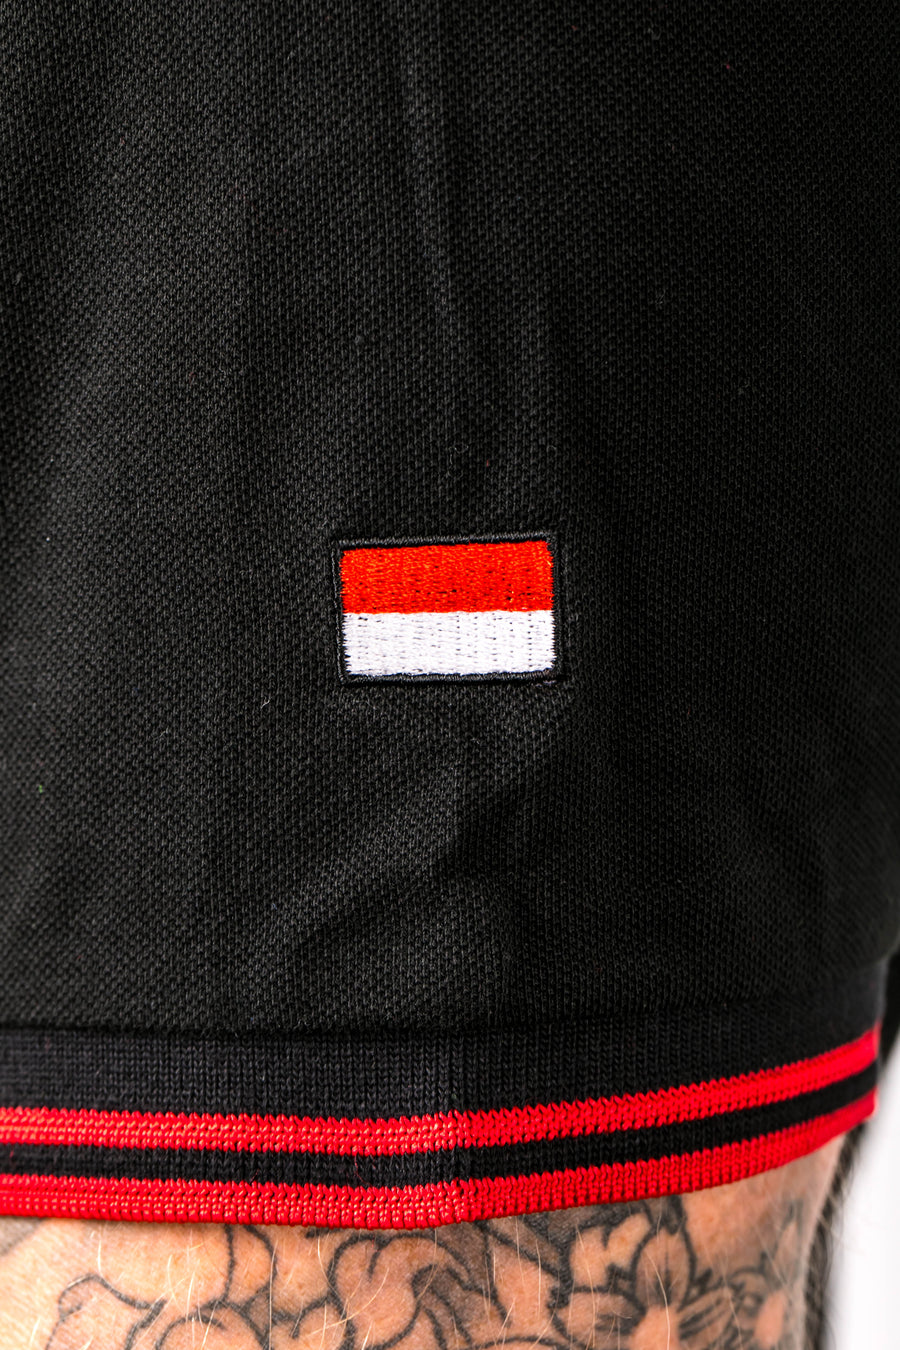 Black and Red Tipped FTT Polo